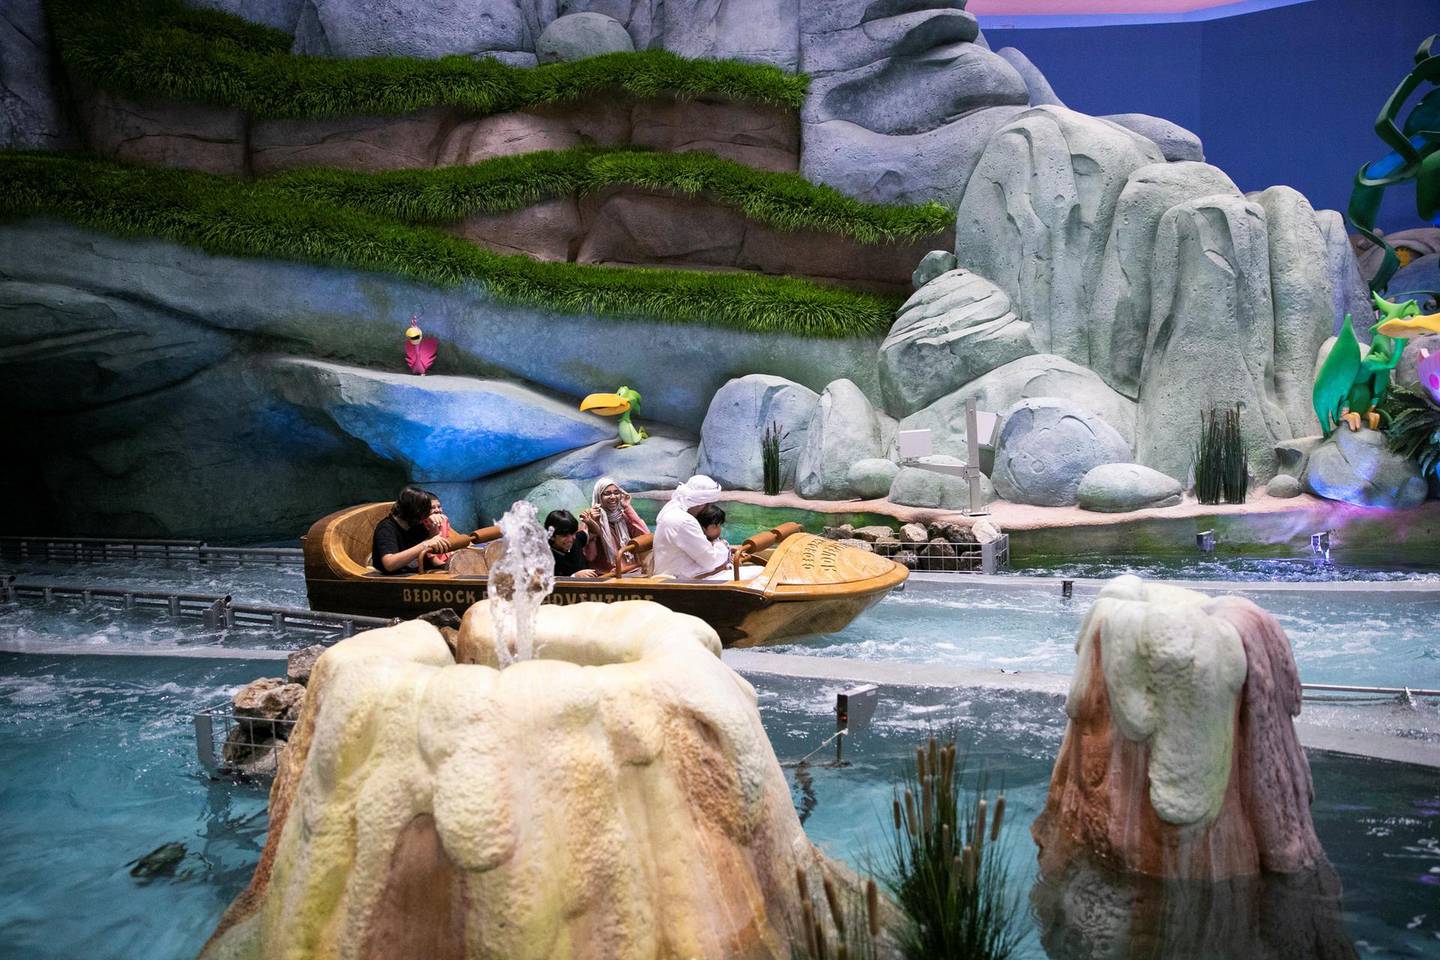 ABU DHABI, UNITED ARAB EMIRATES - JULY 24, 2018. The Flintstones Bedrock River Adventure at Bedrock land in Warner Bros World Abu Dhabi.Almost 15,000 tickets for Warner Bros World Abu Dhabi have been sold ahead of opening to the public on Wednesday.(Photo by Reem Mohammed/The National)Reporter: Section: NA + AL